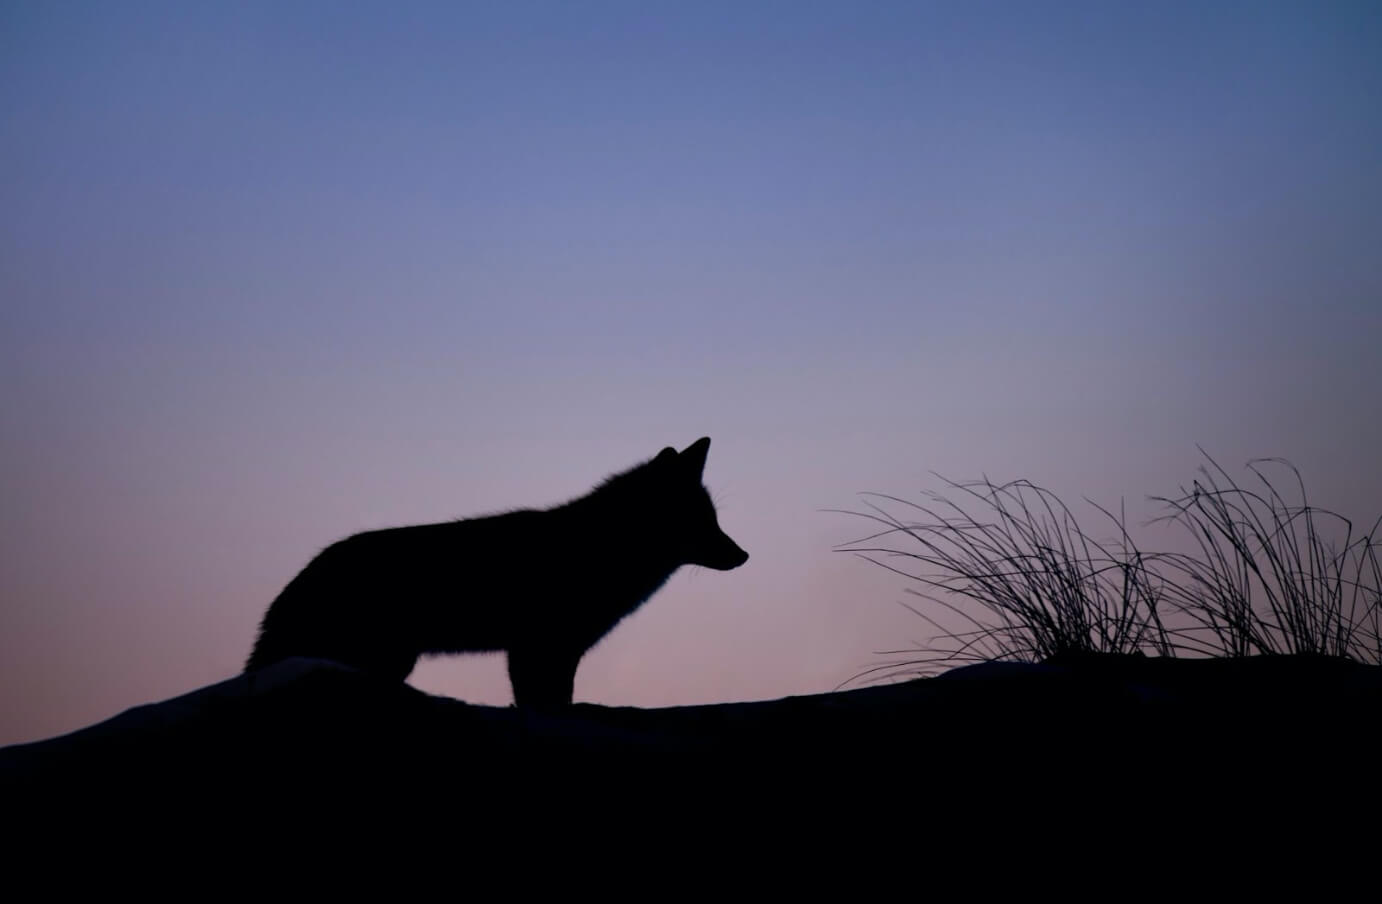 Photograph of a Falkland Island wolf's silhouette at sunset